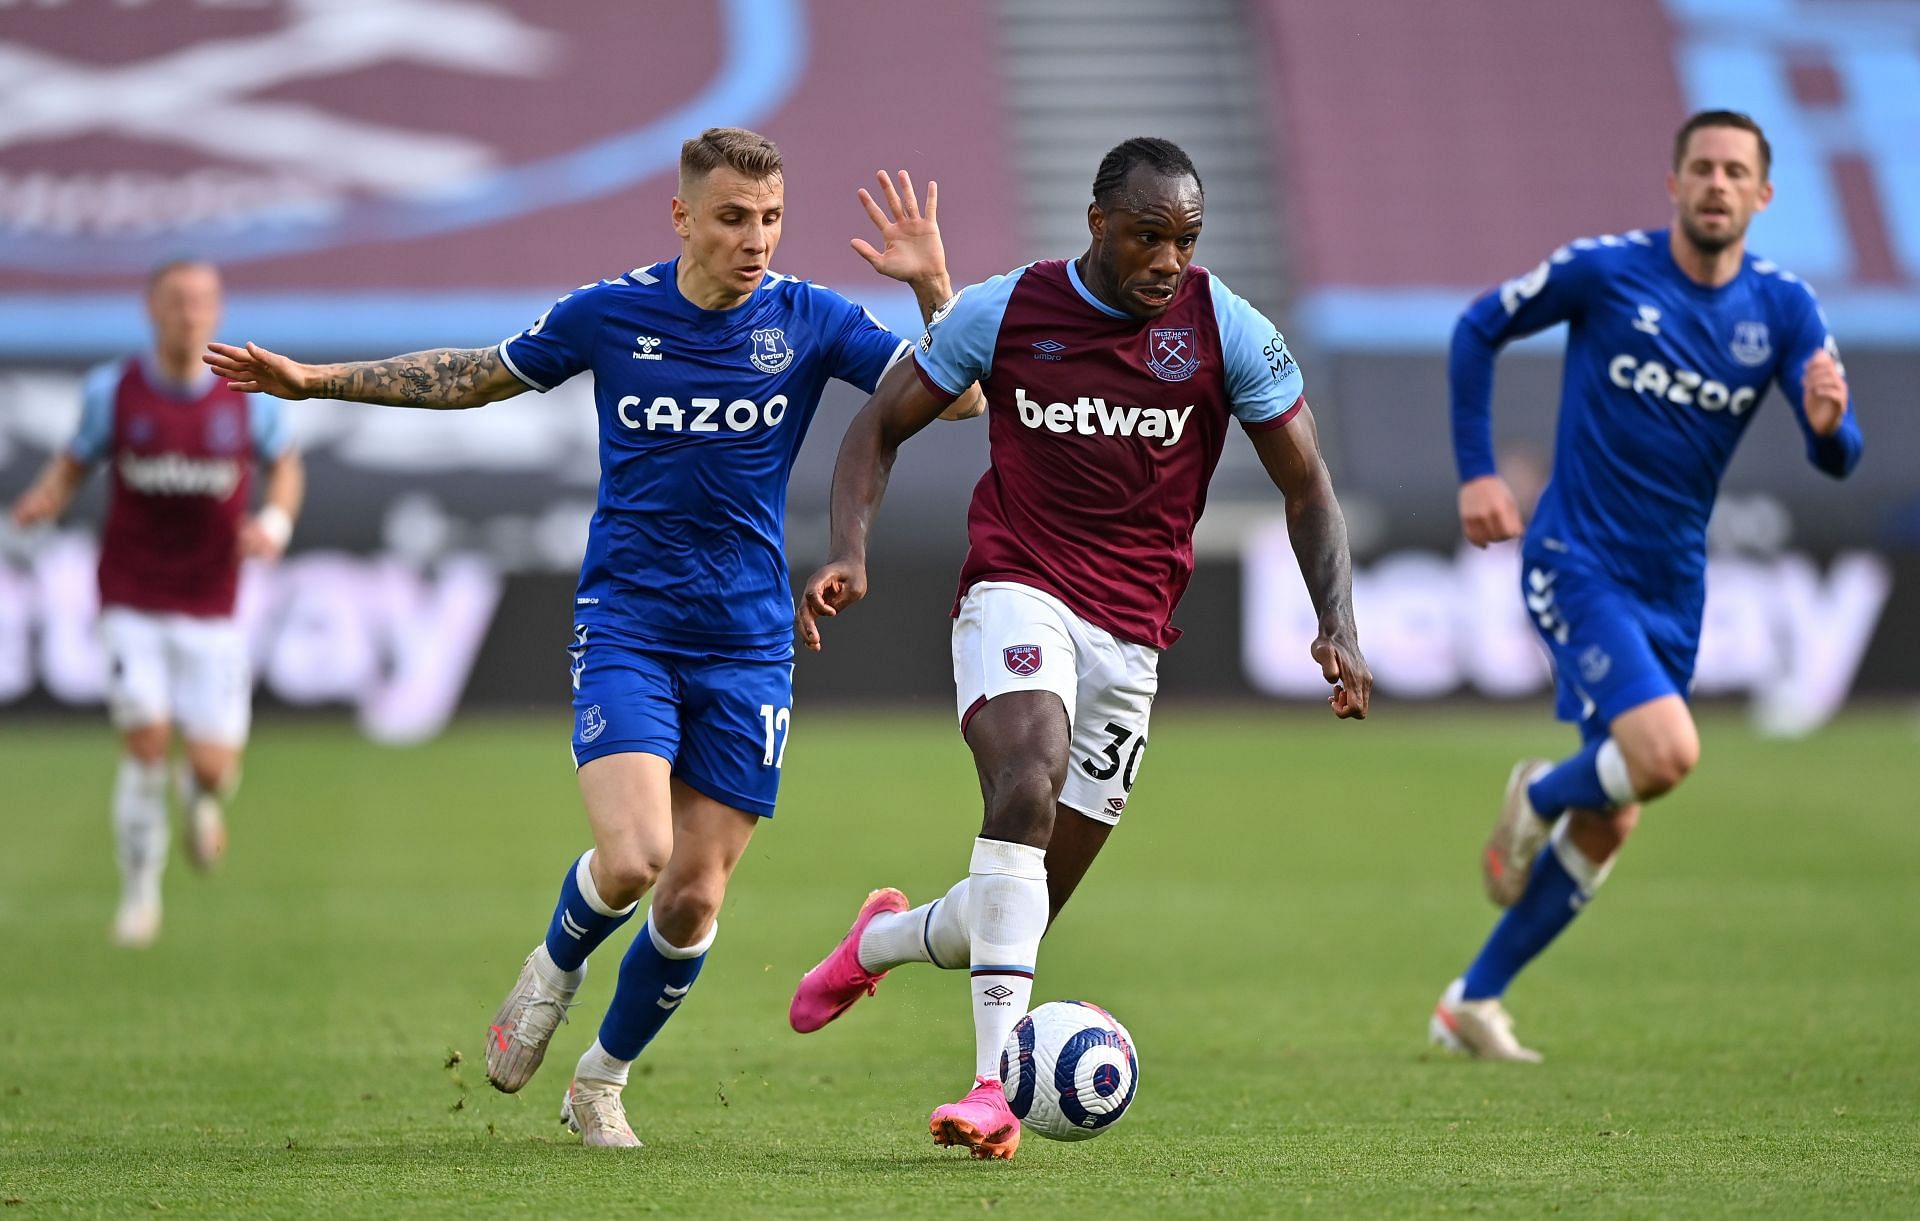 West Ham United take on Everton this weekend